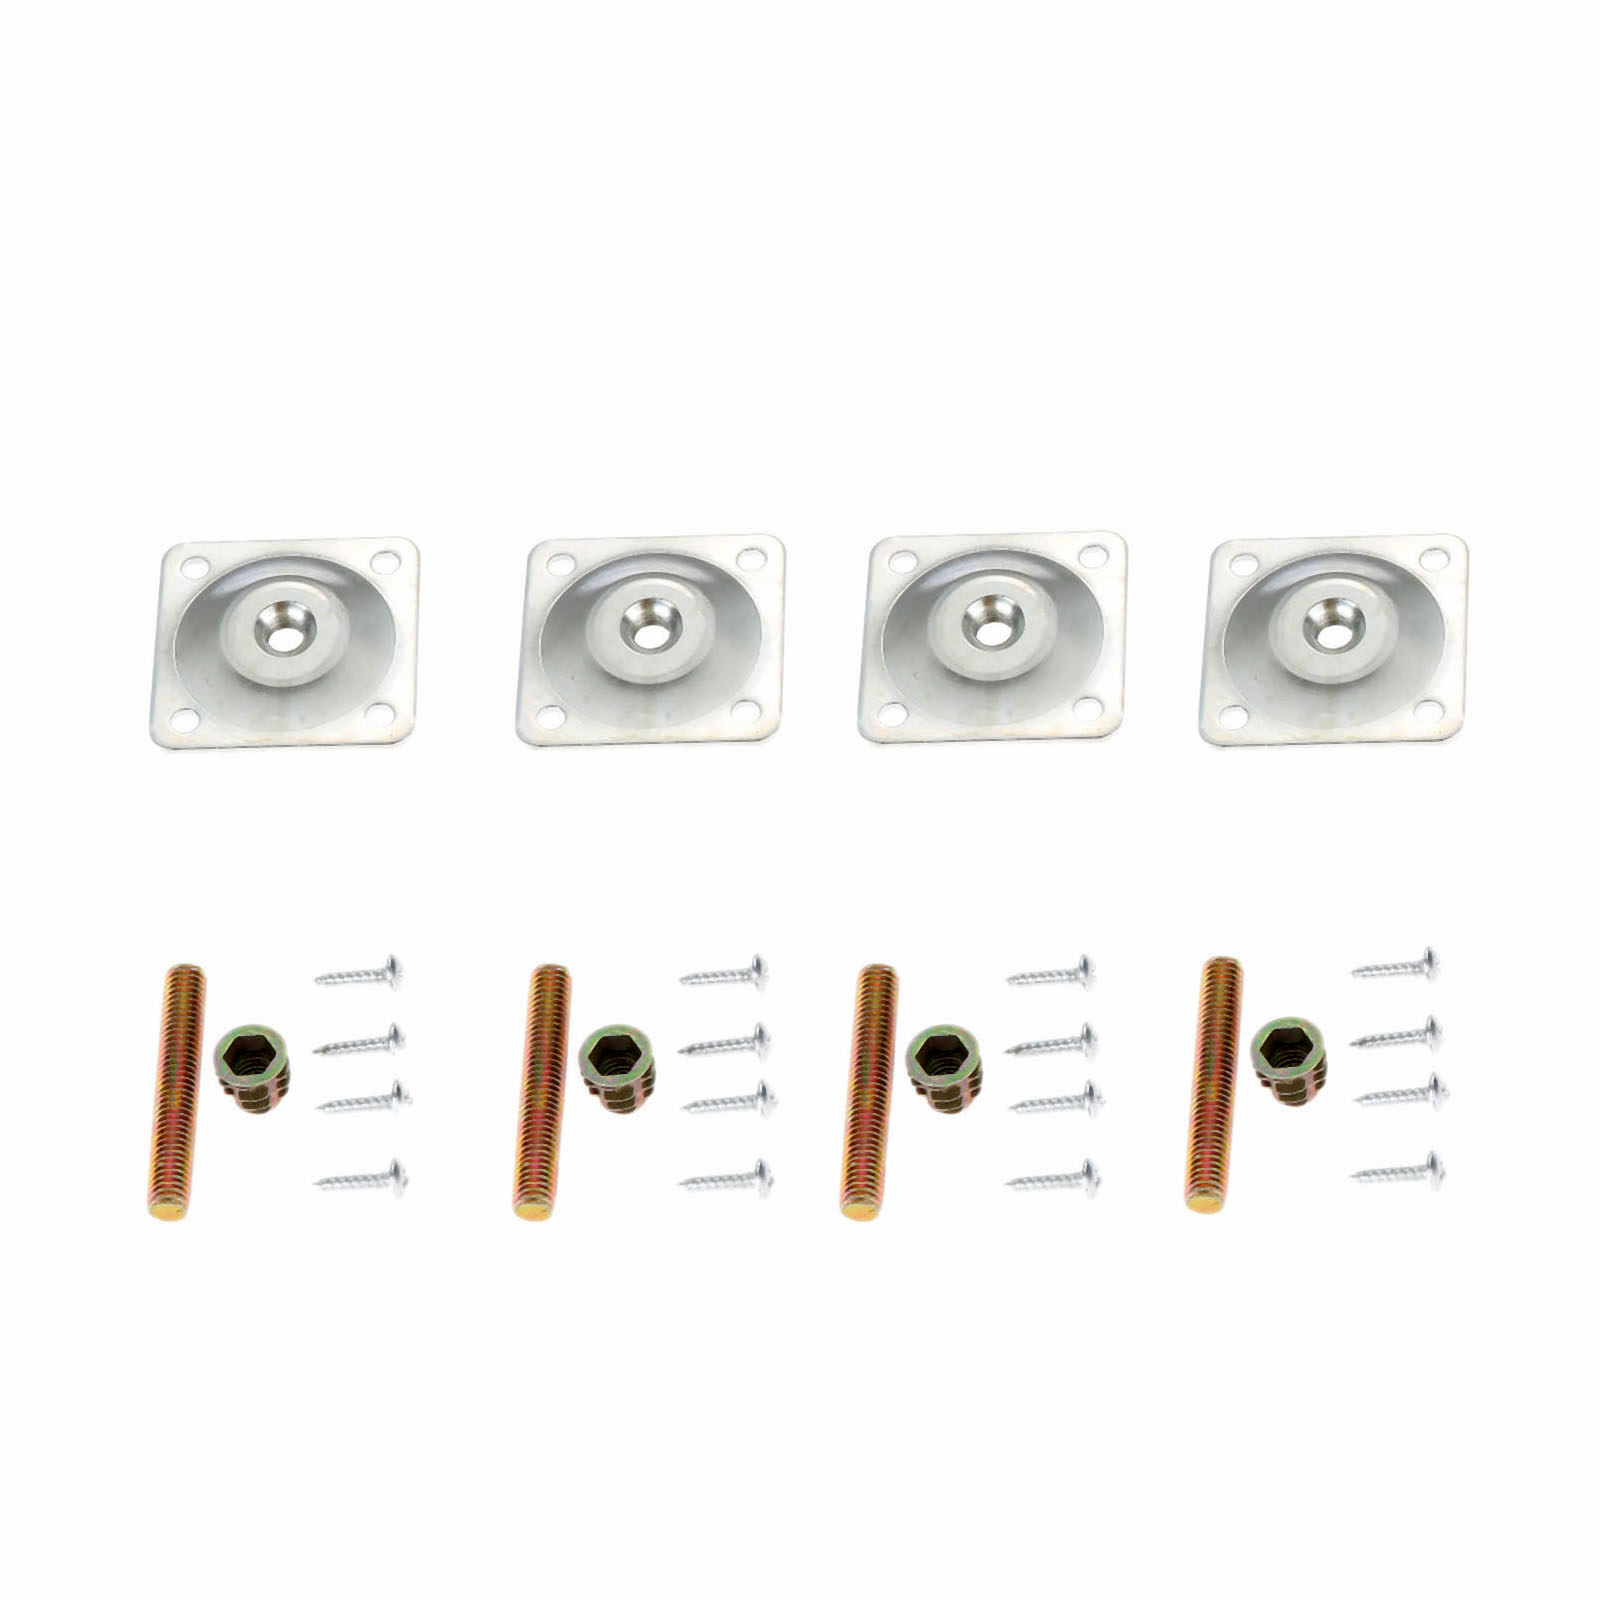 DRELD 4Sets Iron Furniture Leg Mounting Plates 48x48mm Soft Table Chair Feet Attachment Plates with Hanger Bolts Screws Adapters